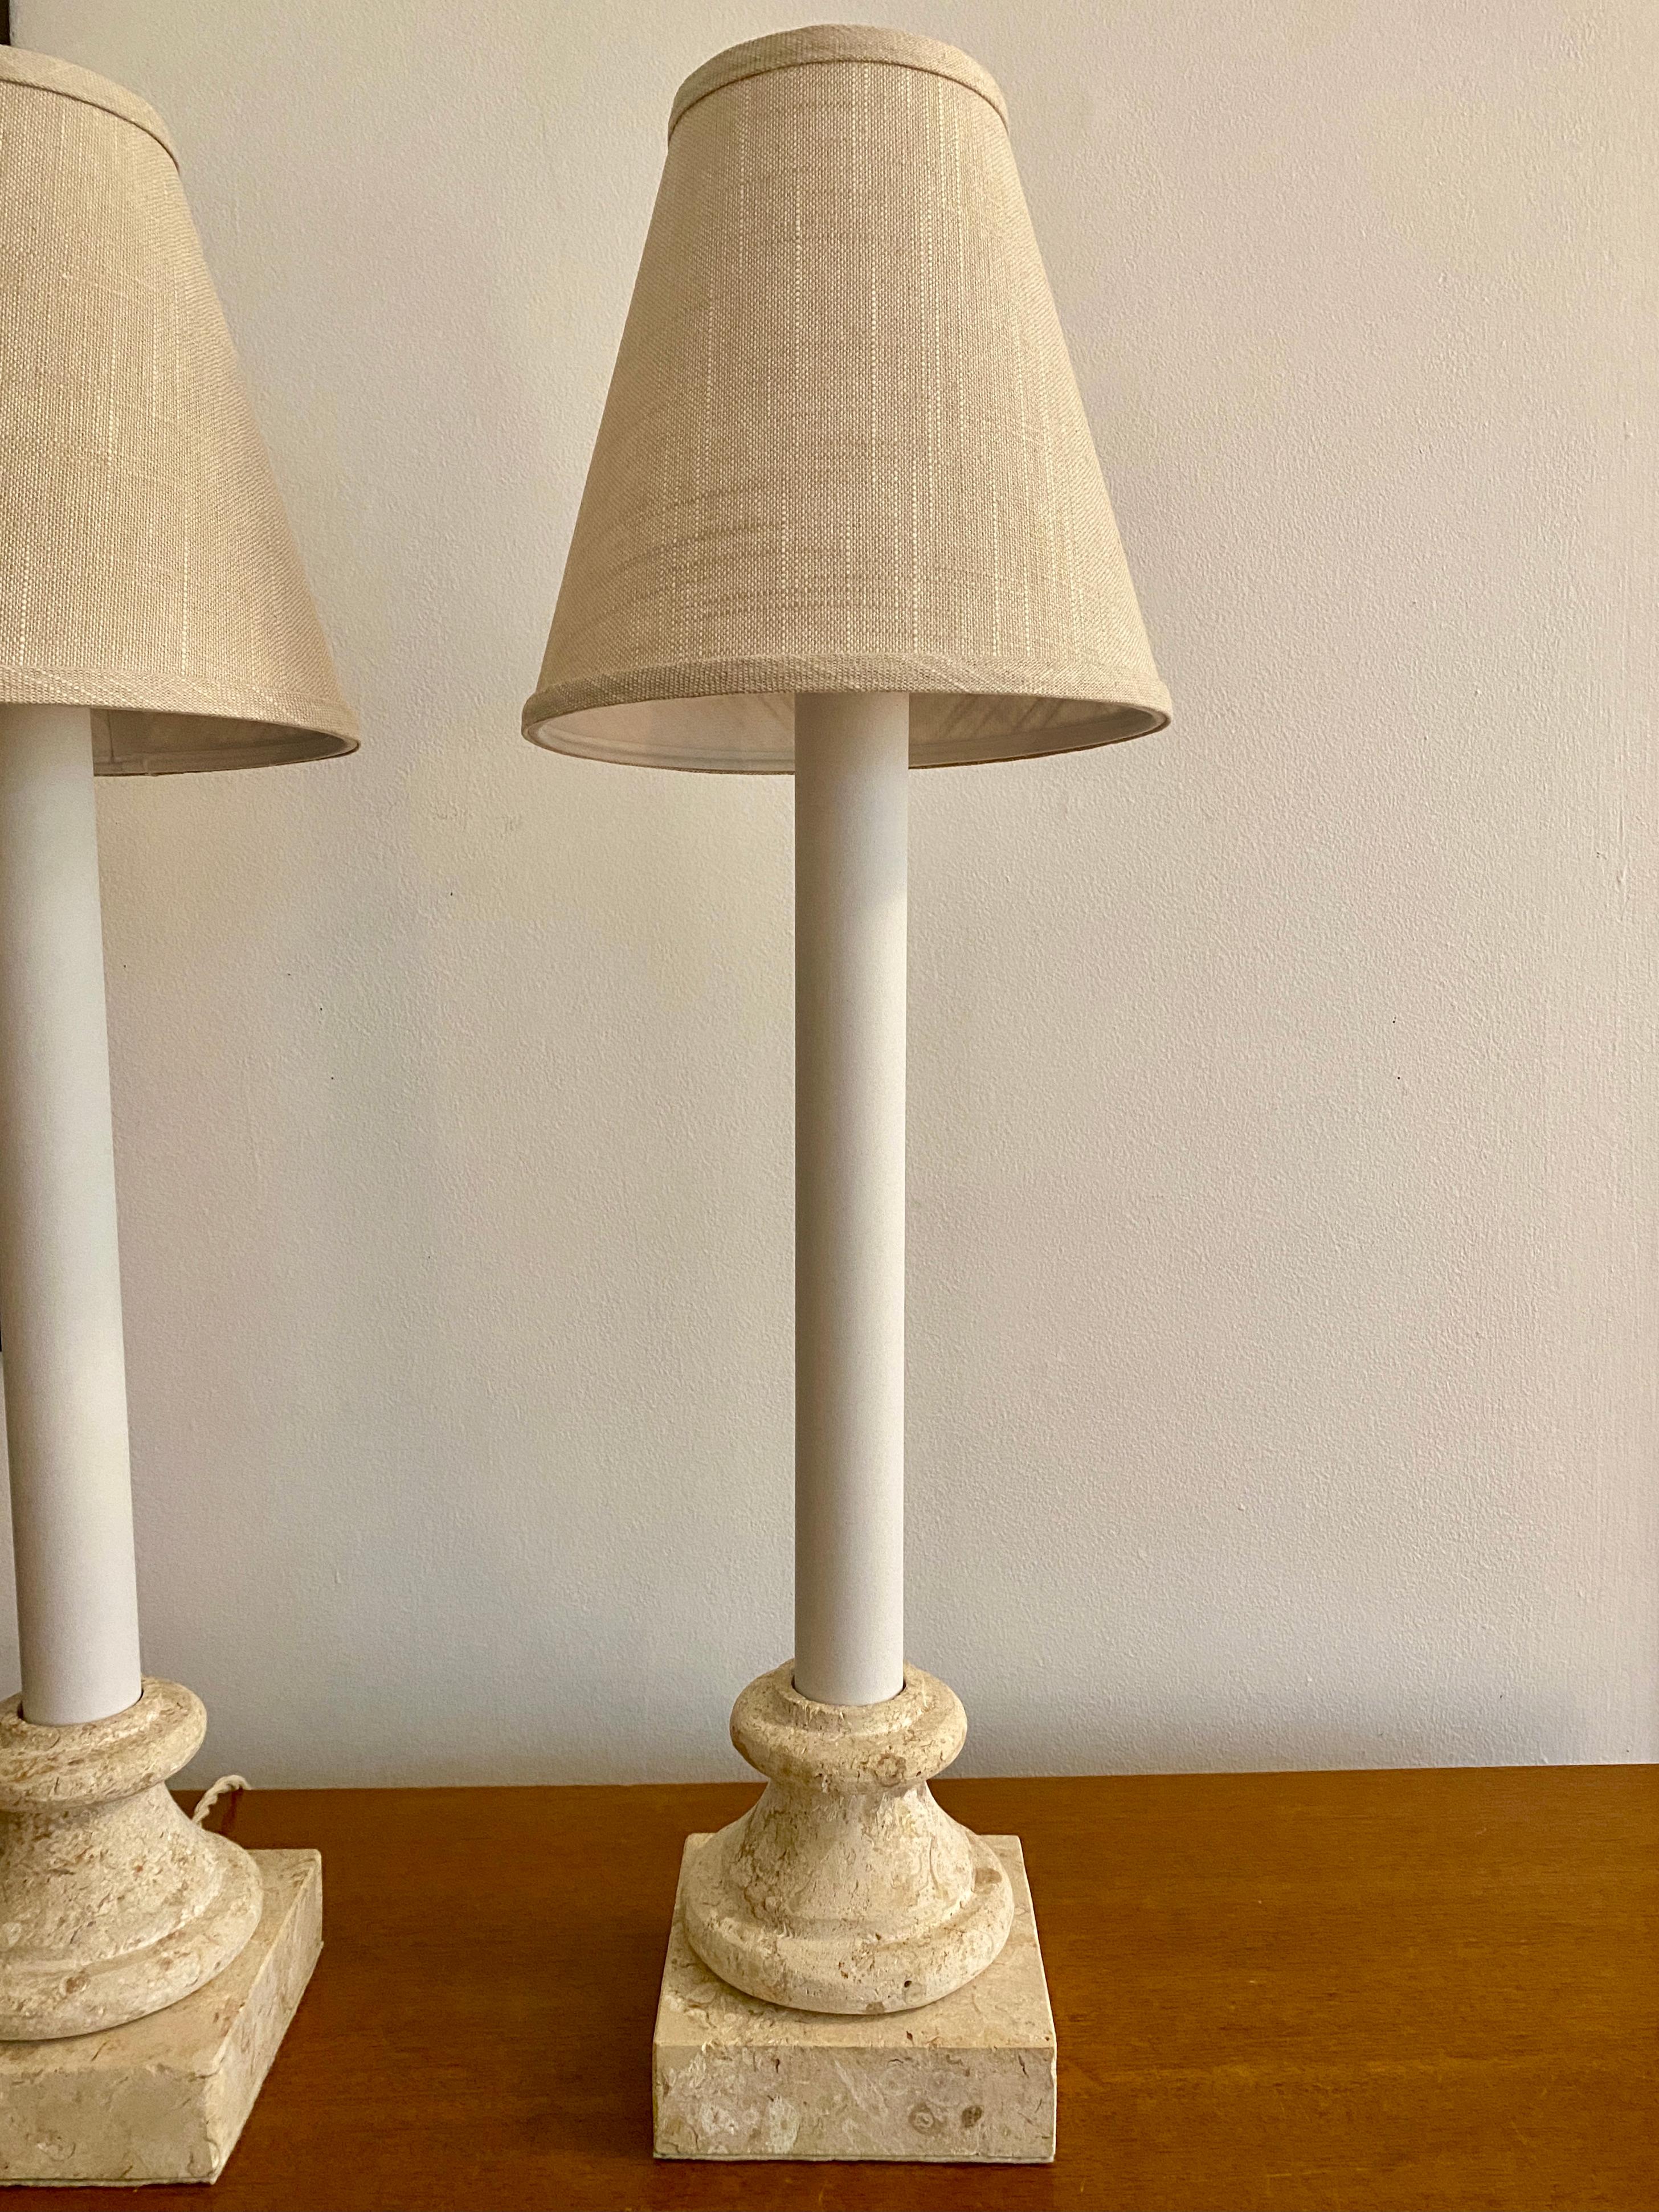 Two Vintage Beige Travertine Lamps with Linen Shades In Good Condition For Sale In Doraville, GA